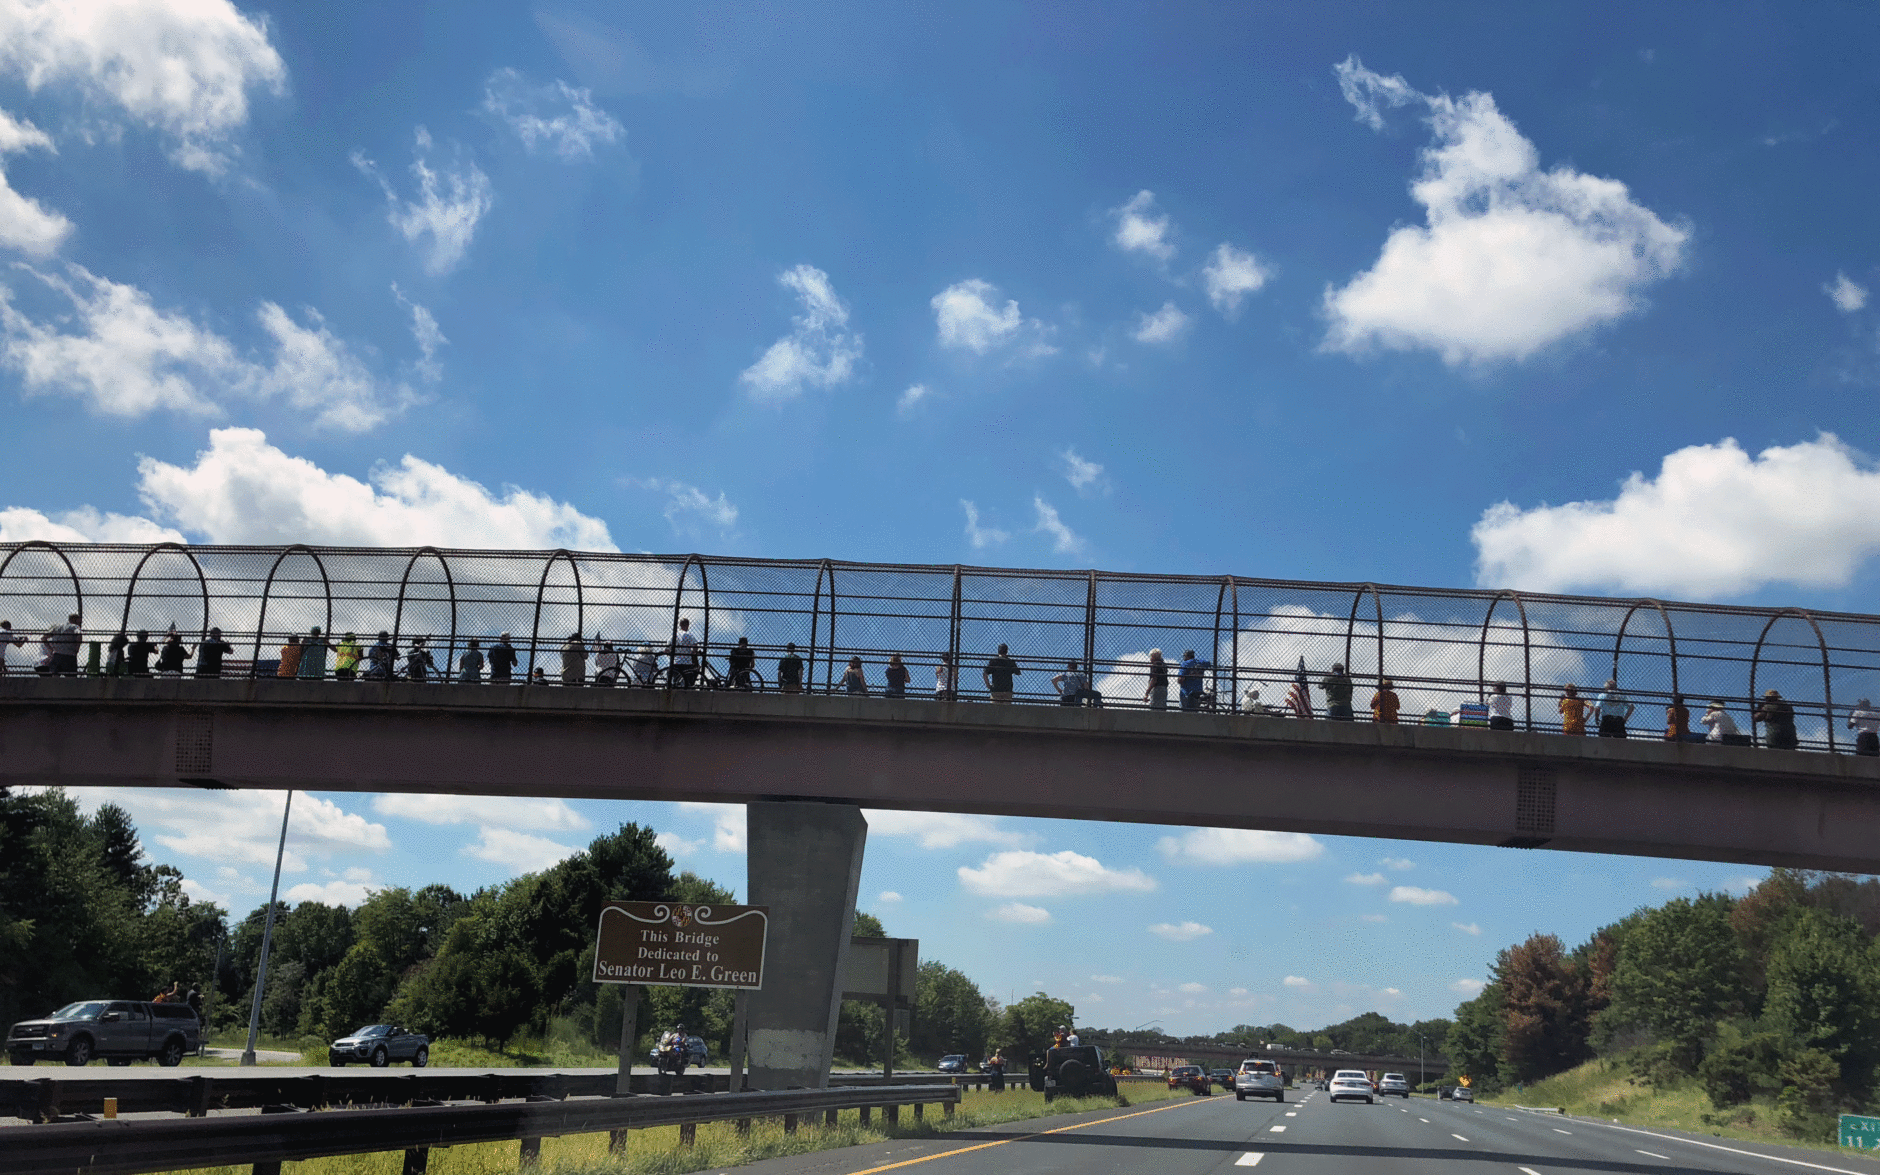 Onlookers gather above US 50 to pay their respects to Sen. John McCain as his funeral procession travels to the US Naval Academy in Annapolis, Maryland. (WTOP/Valerie Bonk)